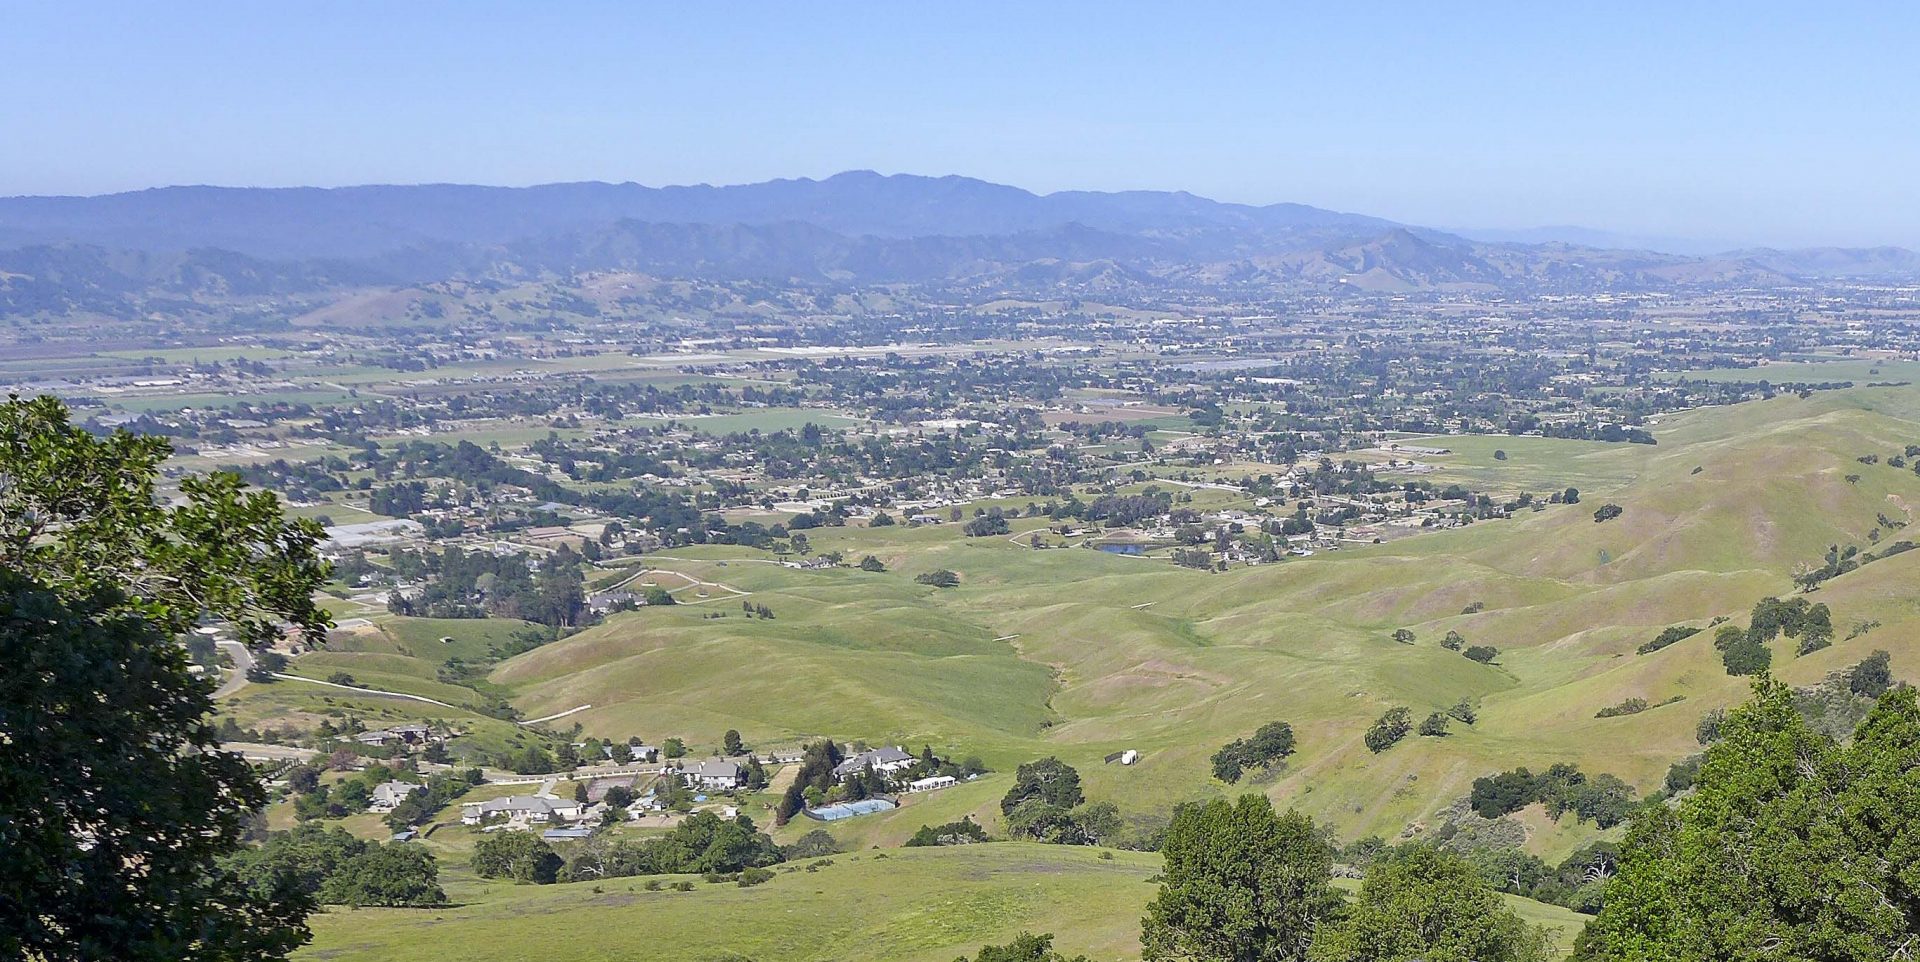 Developer Pushes for Excessive, Premature Growth in Gilroy